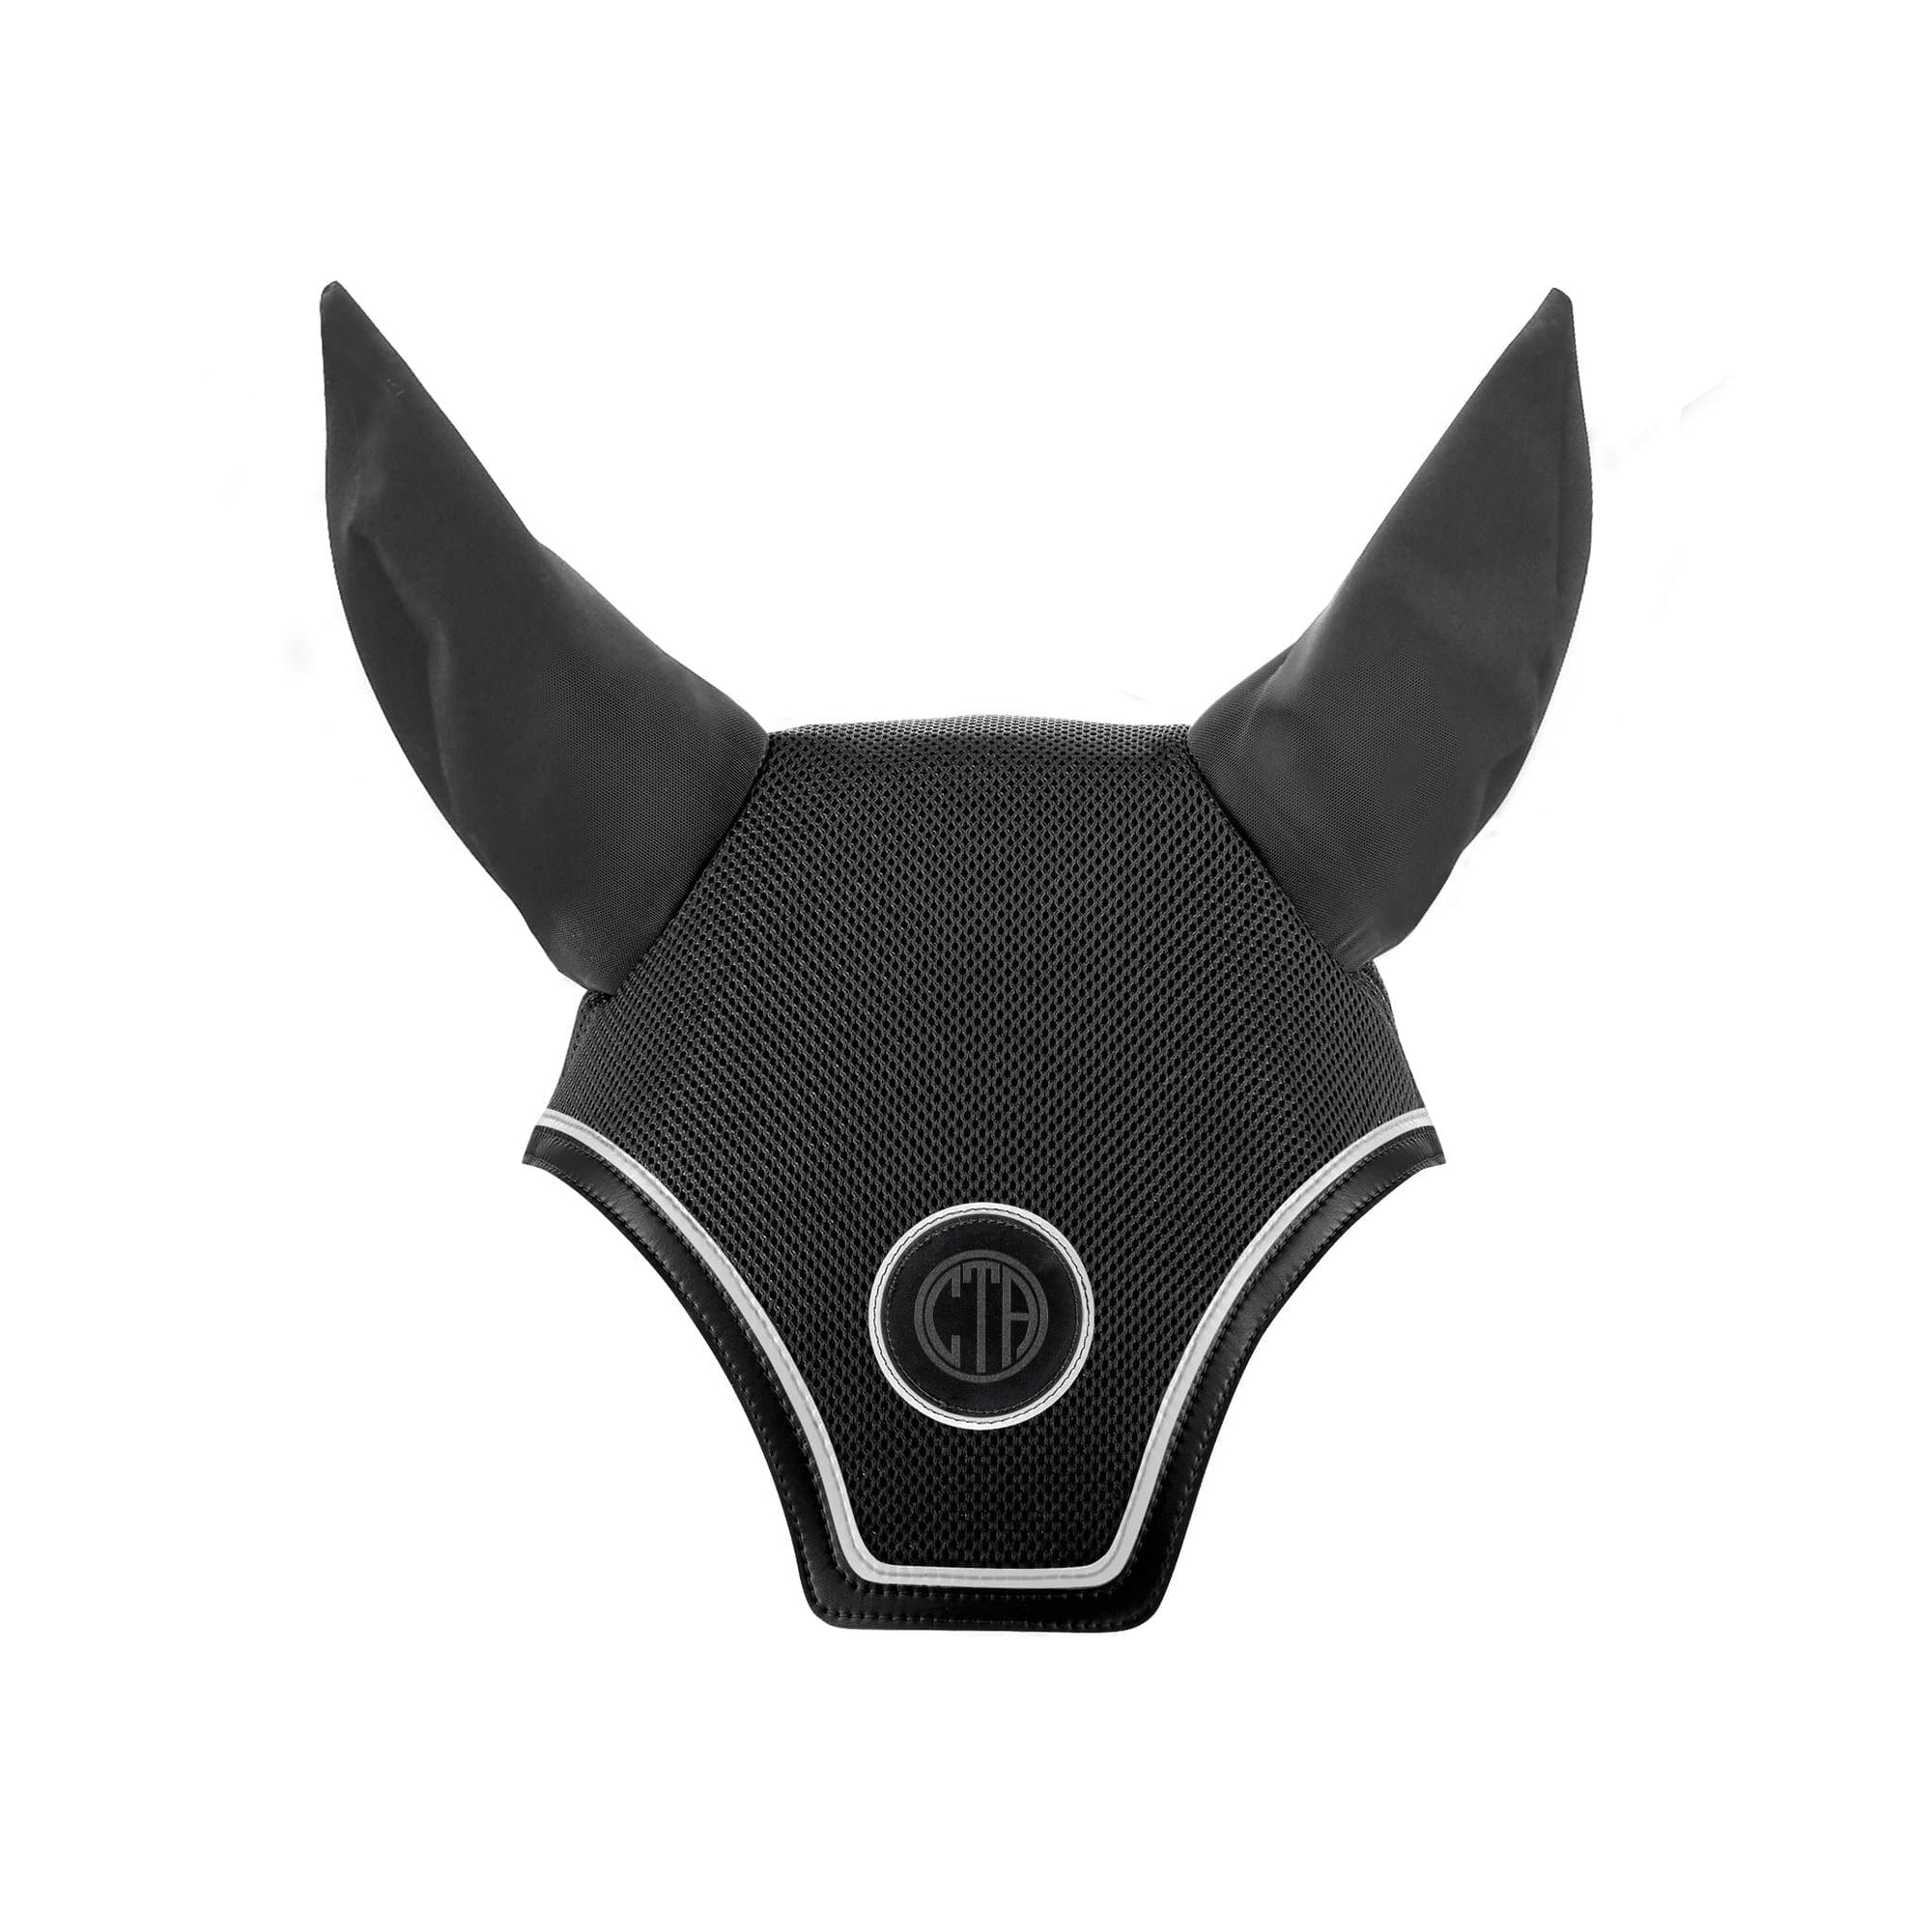 The Custom Ear Bonnet is constructed from multi-dimensional air-mesh to keep the head cool & dry, with spandex mesh ears that ensure a comfortable fit